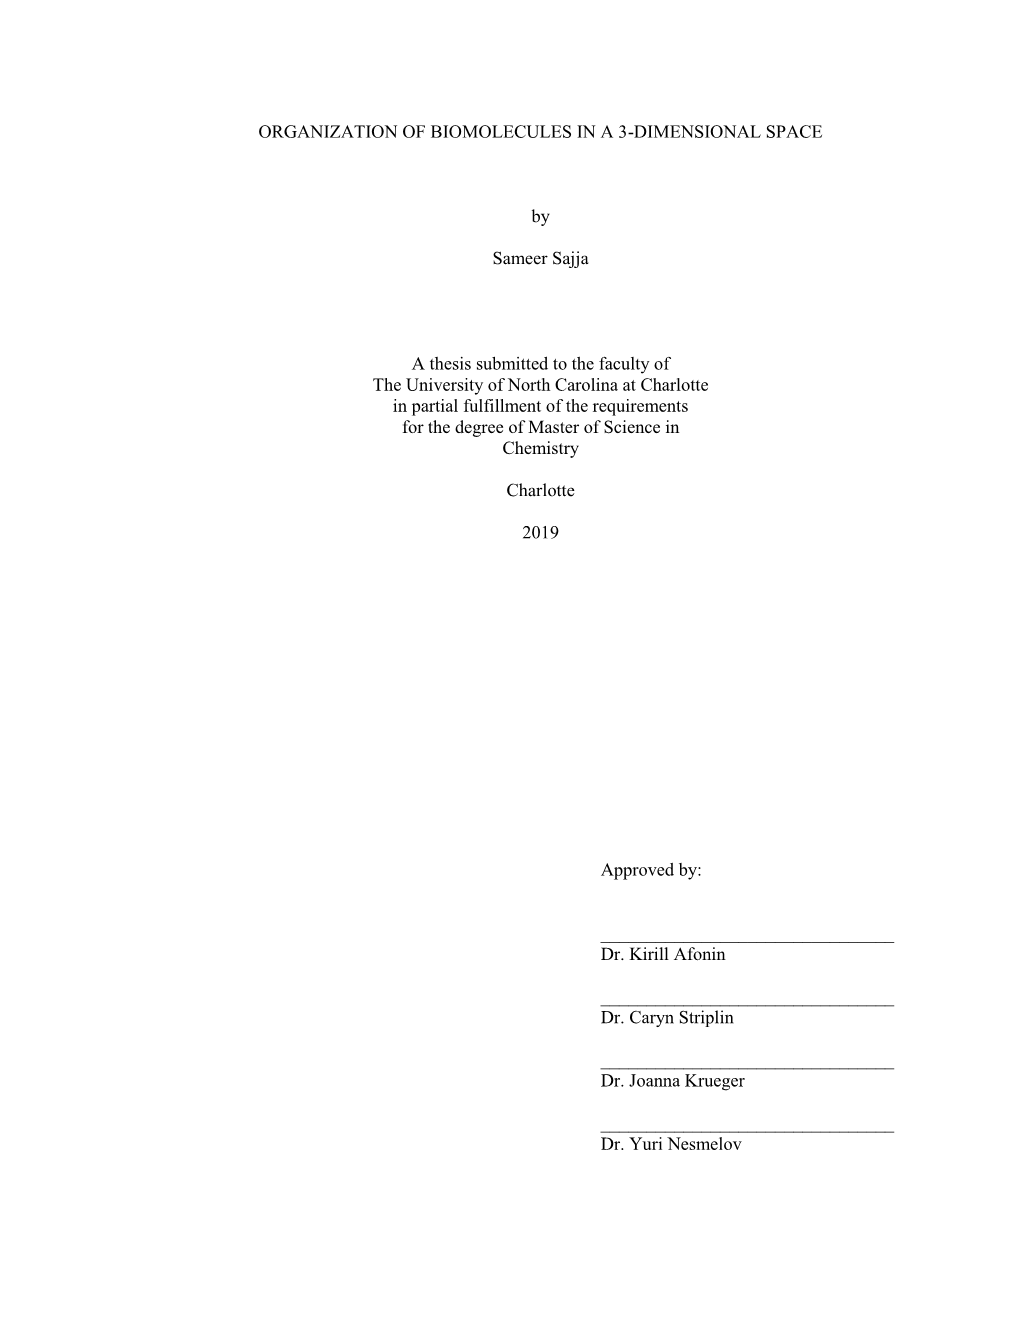 ORGANIZATION of BIOMOLECULES in a 3-DIMENSIONAL SPACE by Sameer Sajja a Thesis Submitted to the Faculty of the University Of